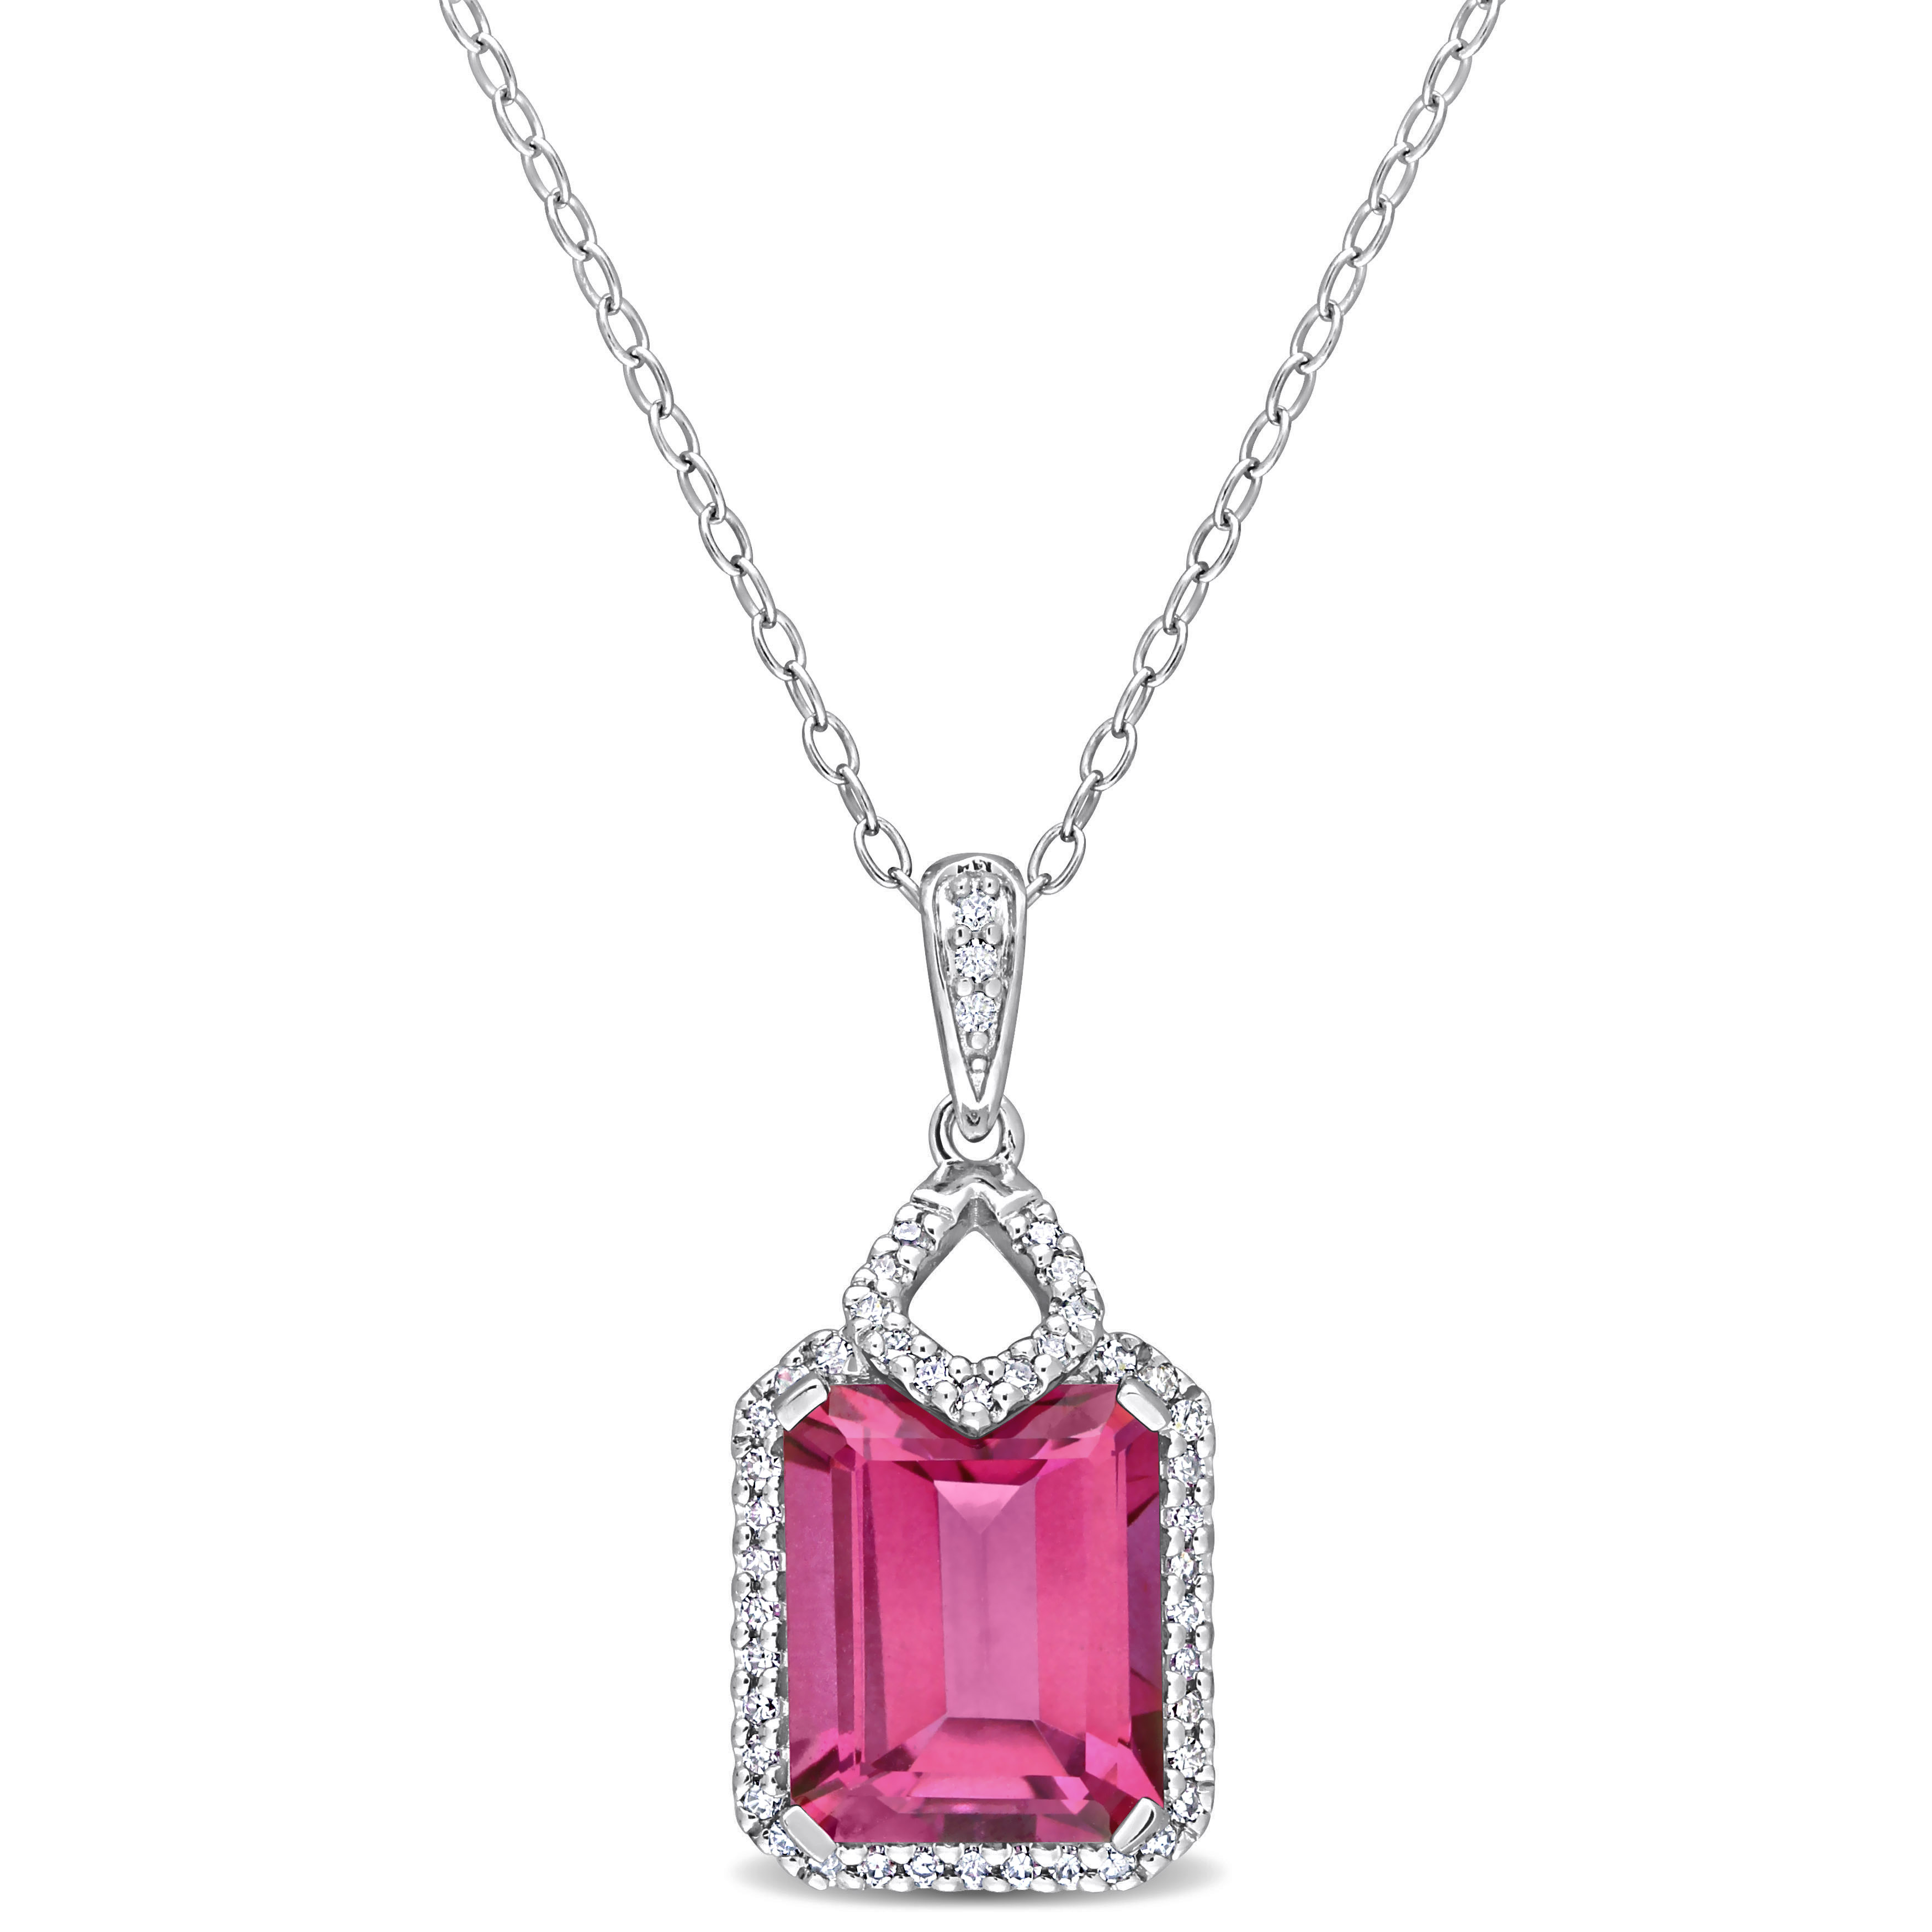 5 3/5 CT TGW Pink Topaz and 1/4 CT TW Diamond Halo Pendant with Chain in Sterling Silver - 18 in.